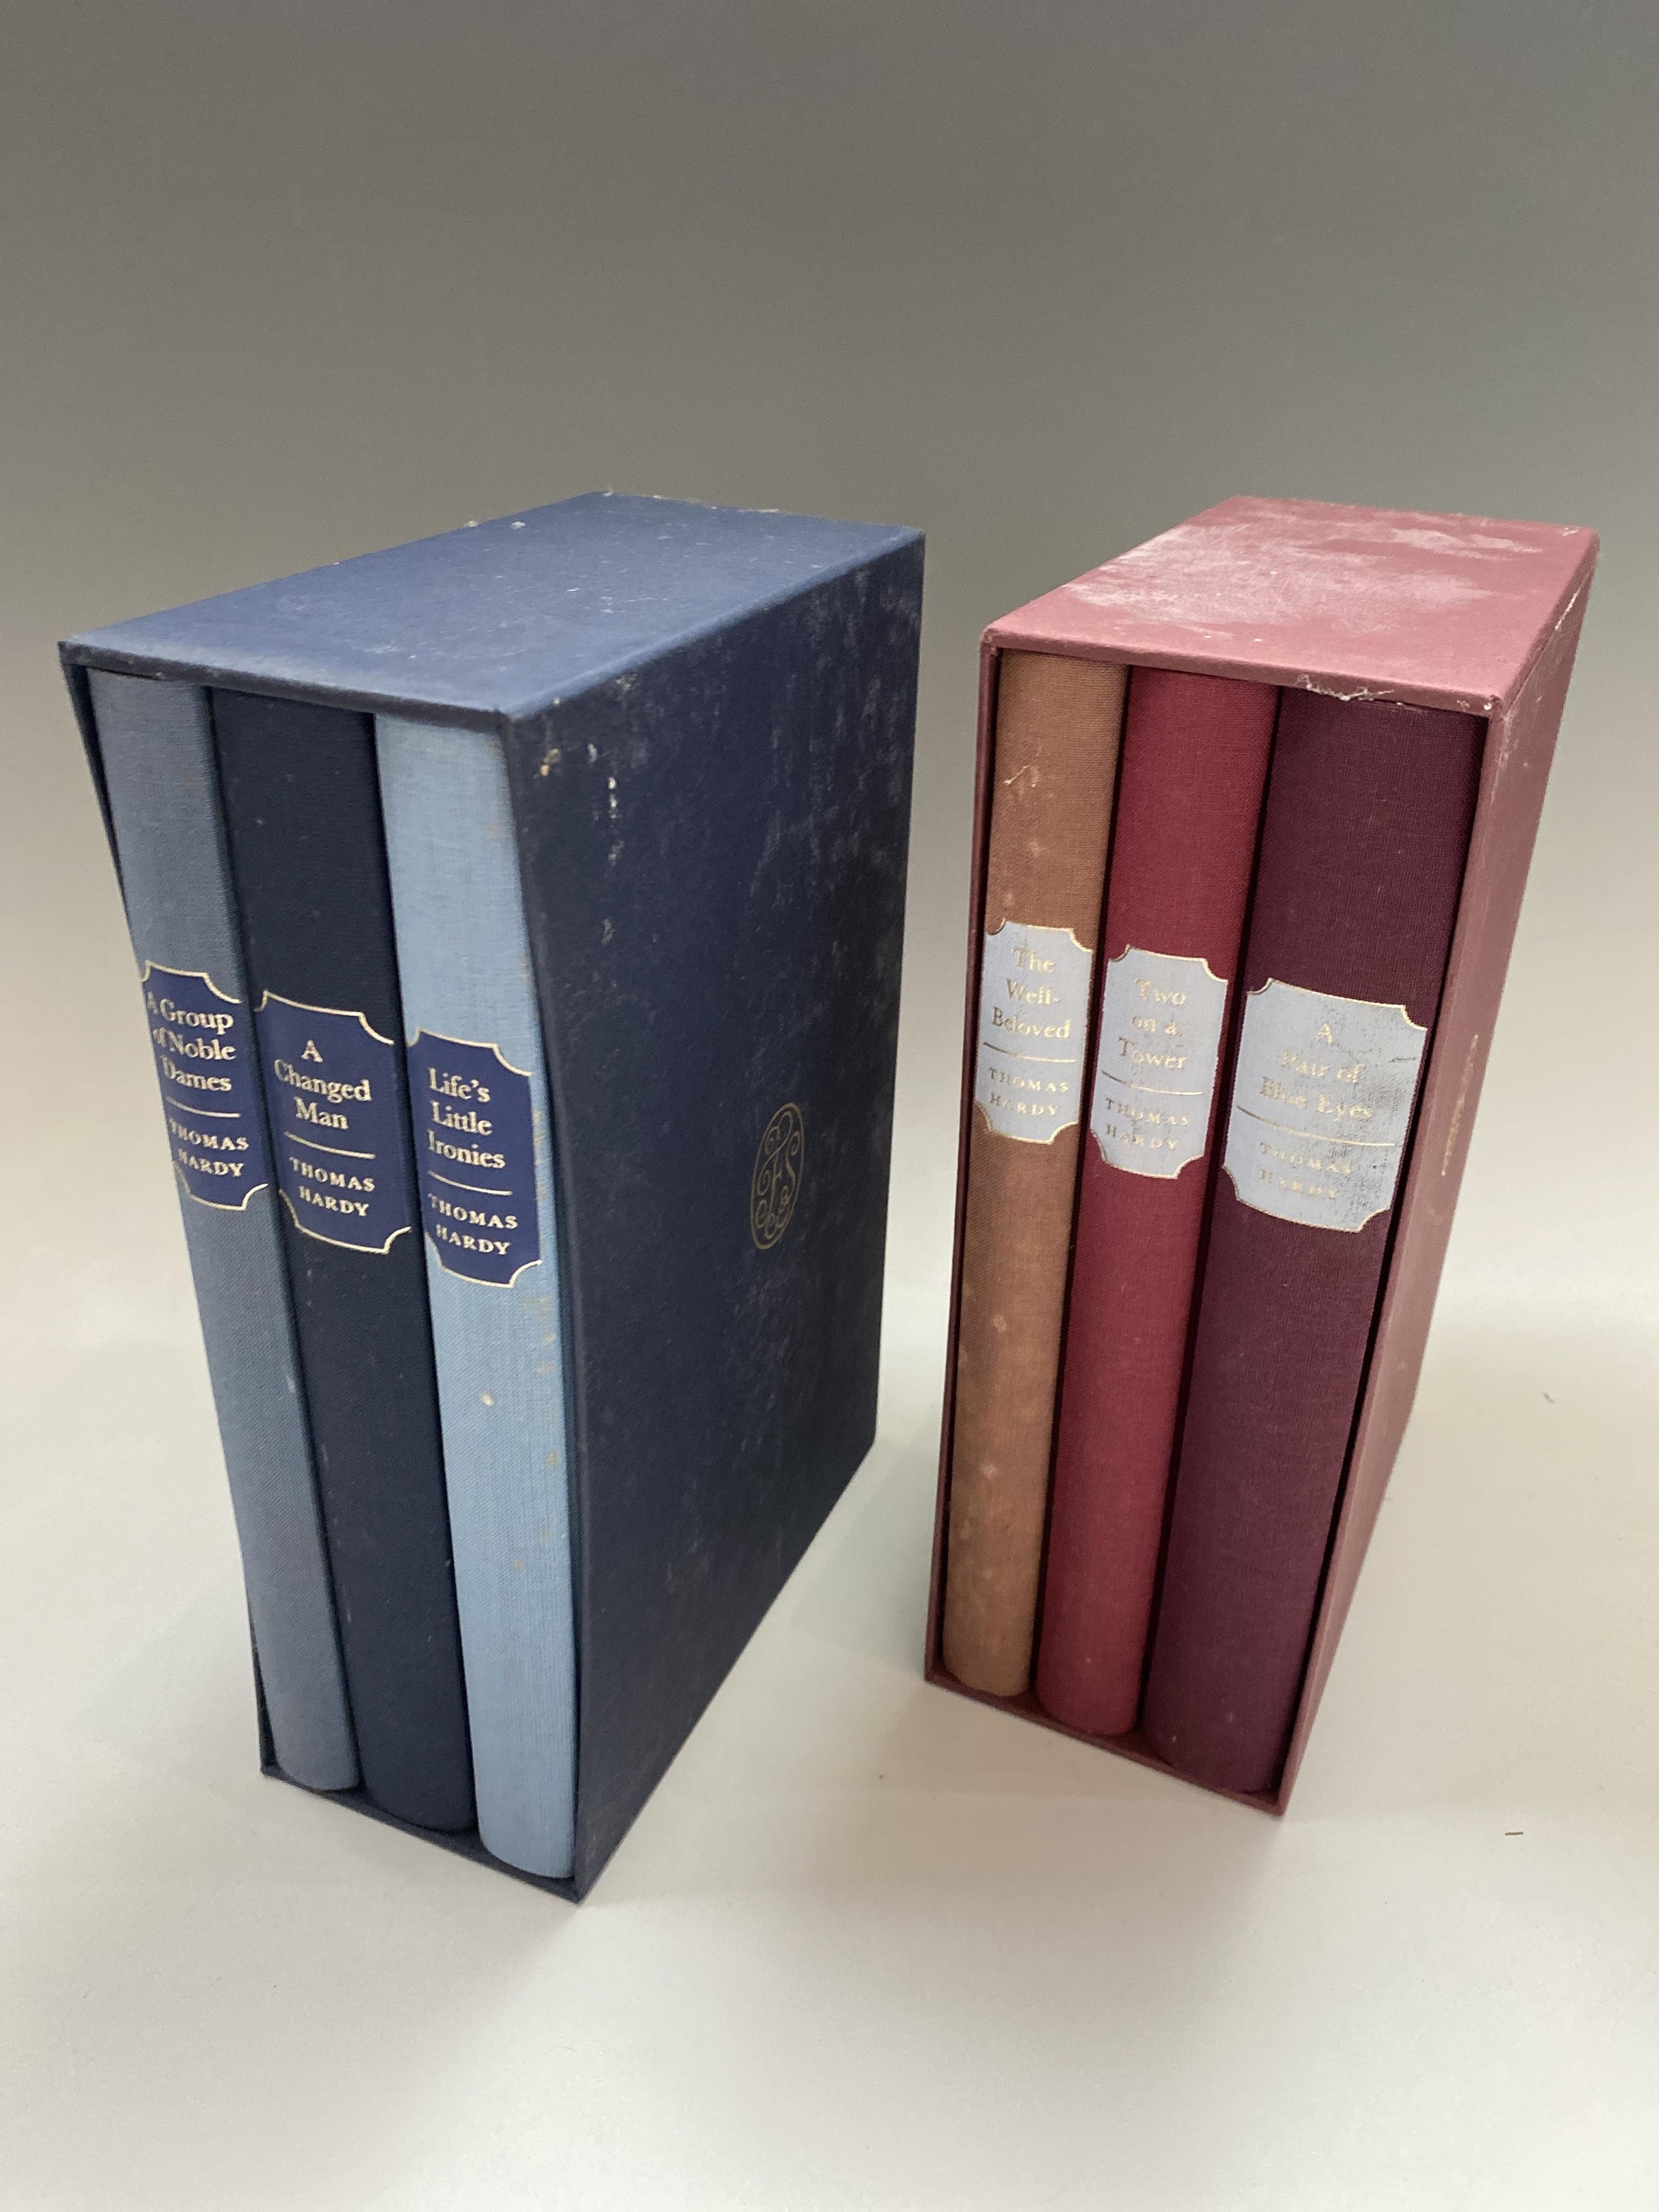 FOLIO SOCIETY. Sixteen volumes of Thomas Hardy including Tess d'Urbervilles, The Woodlanders, and - Image 3 of 5